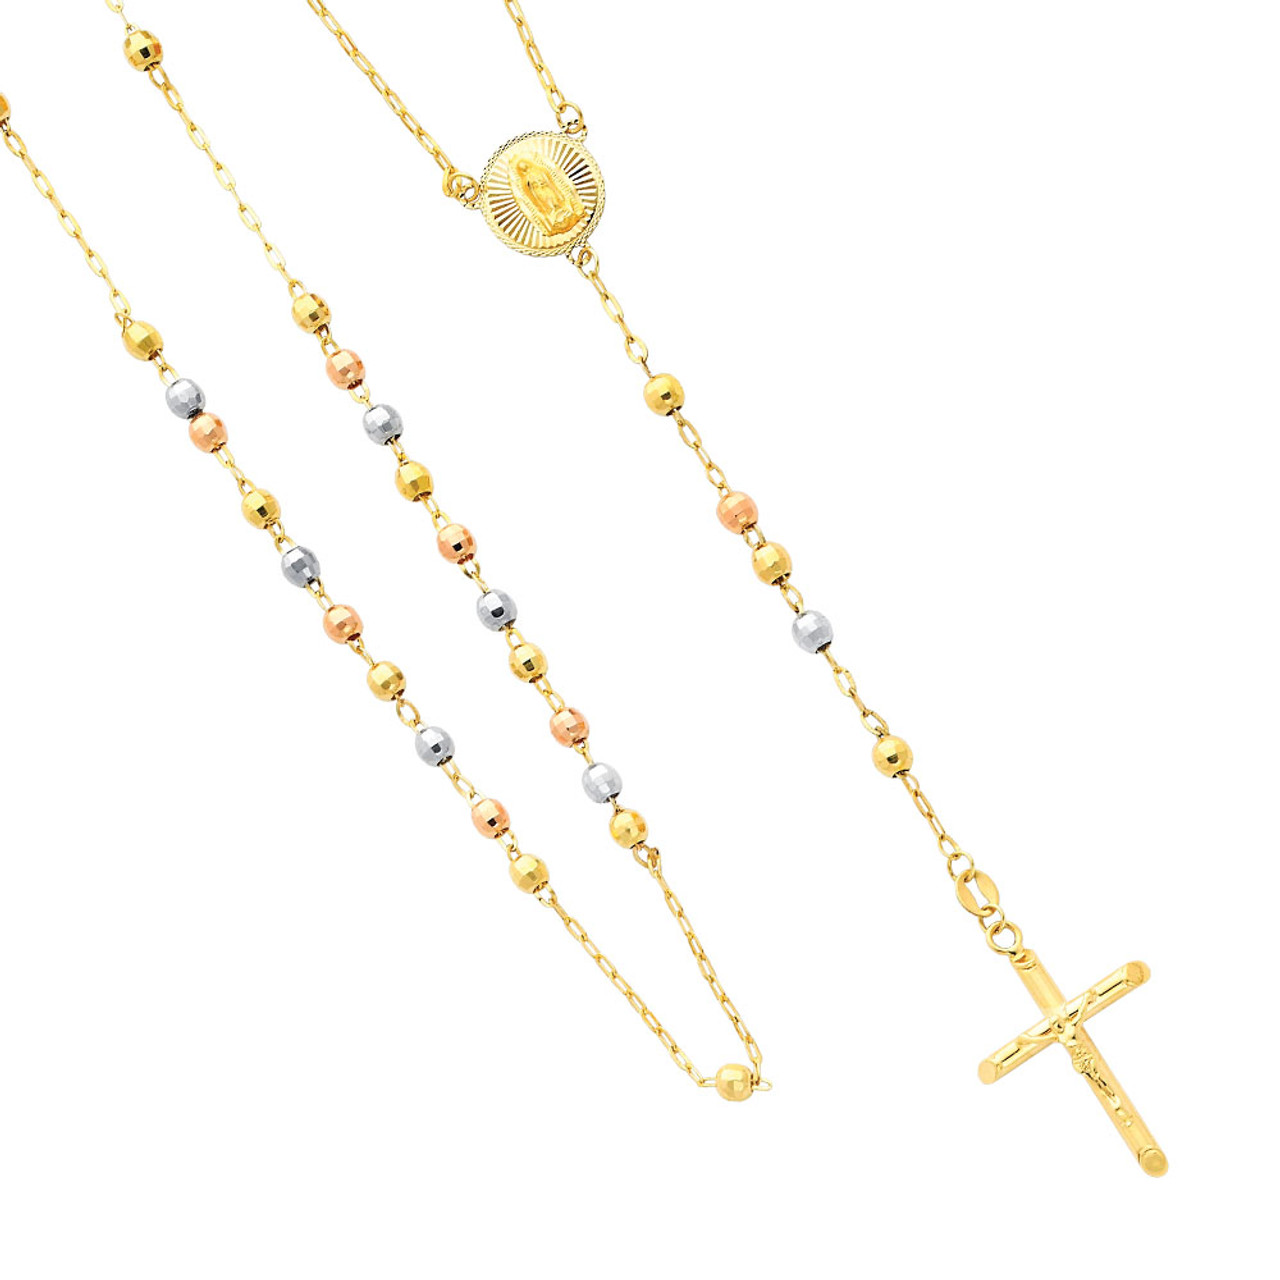 14K Tri-Color Gold Rosary Necklace - The Madonna